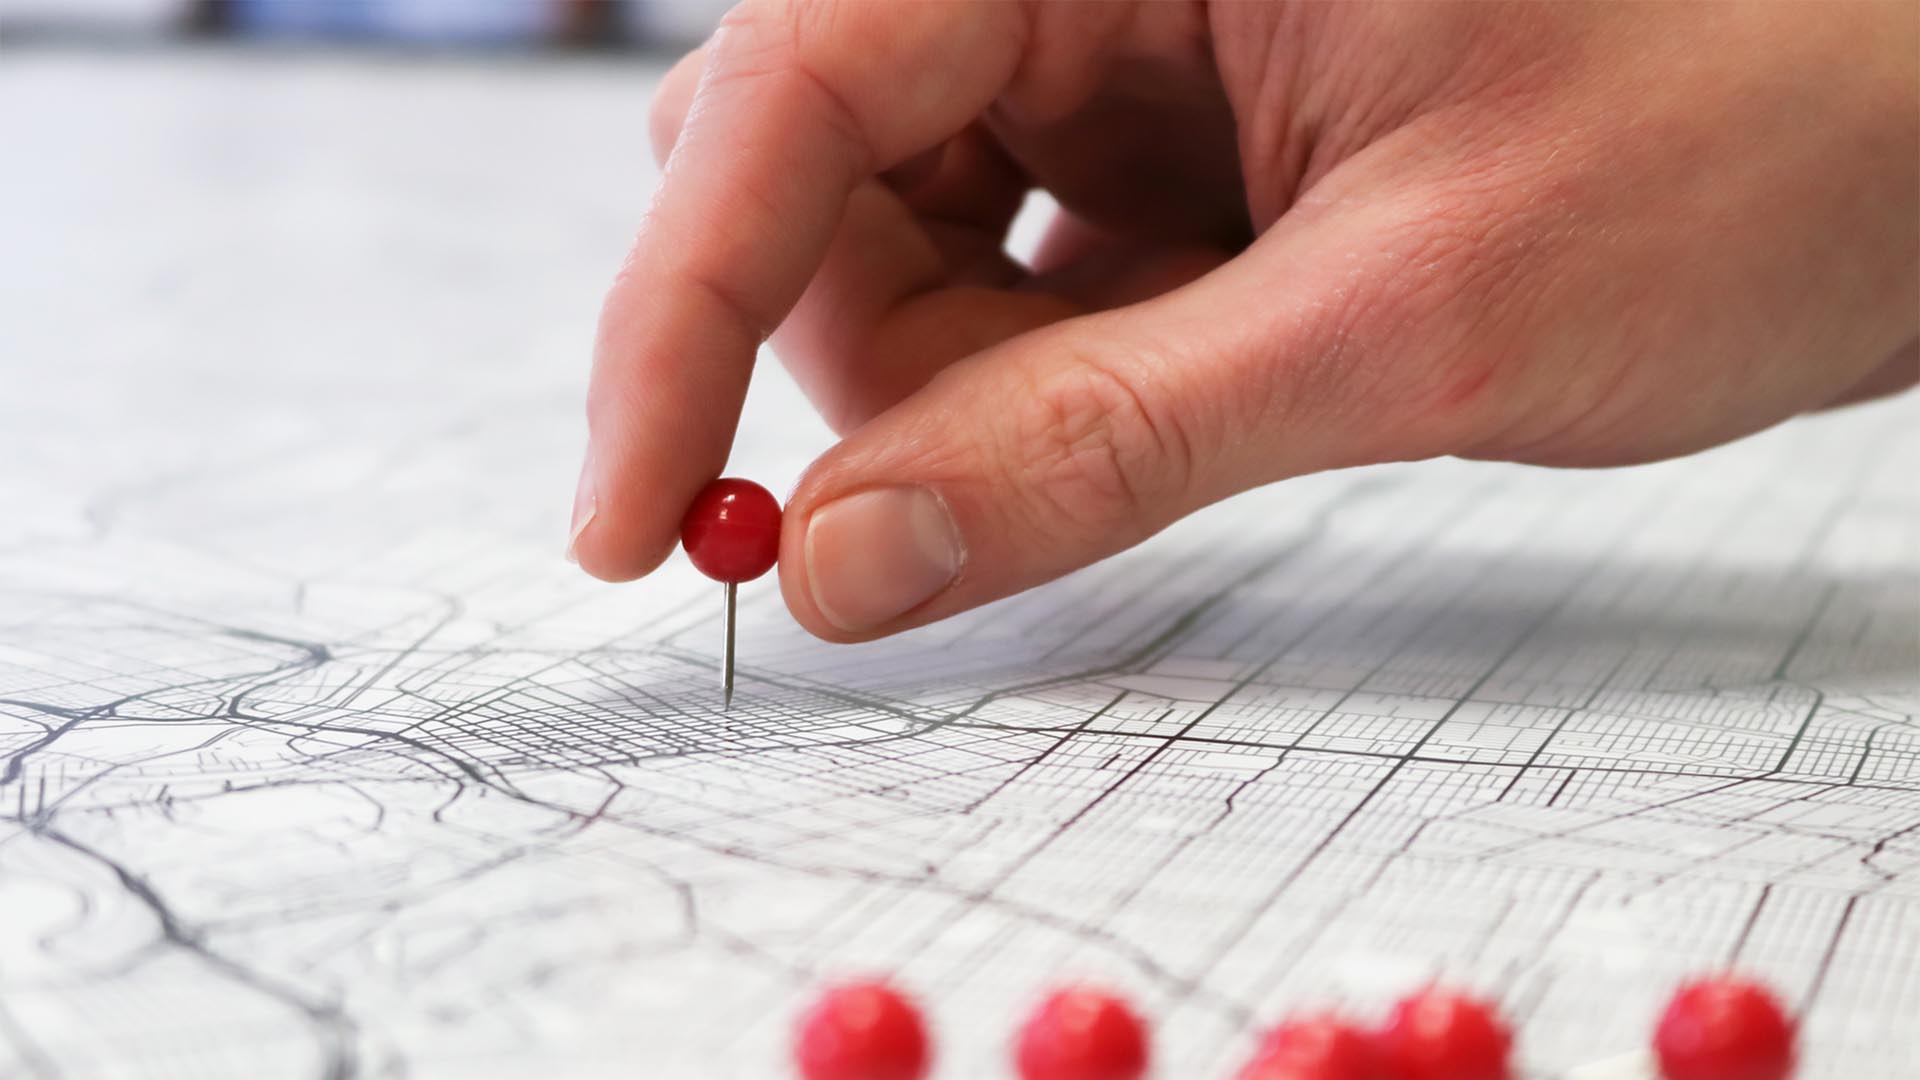 hand placing a pin on a street map